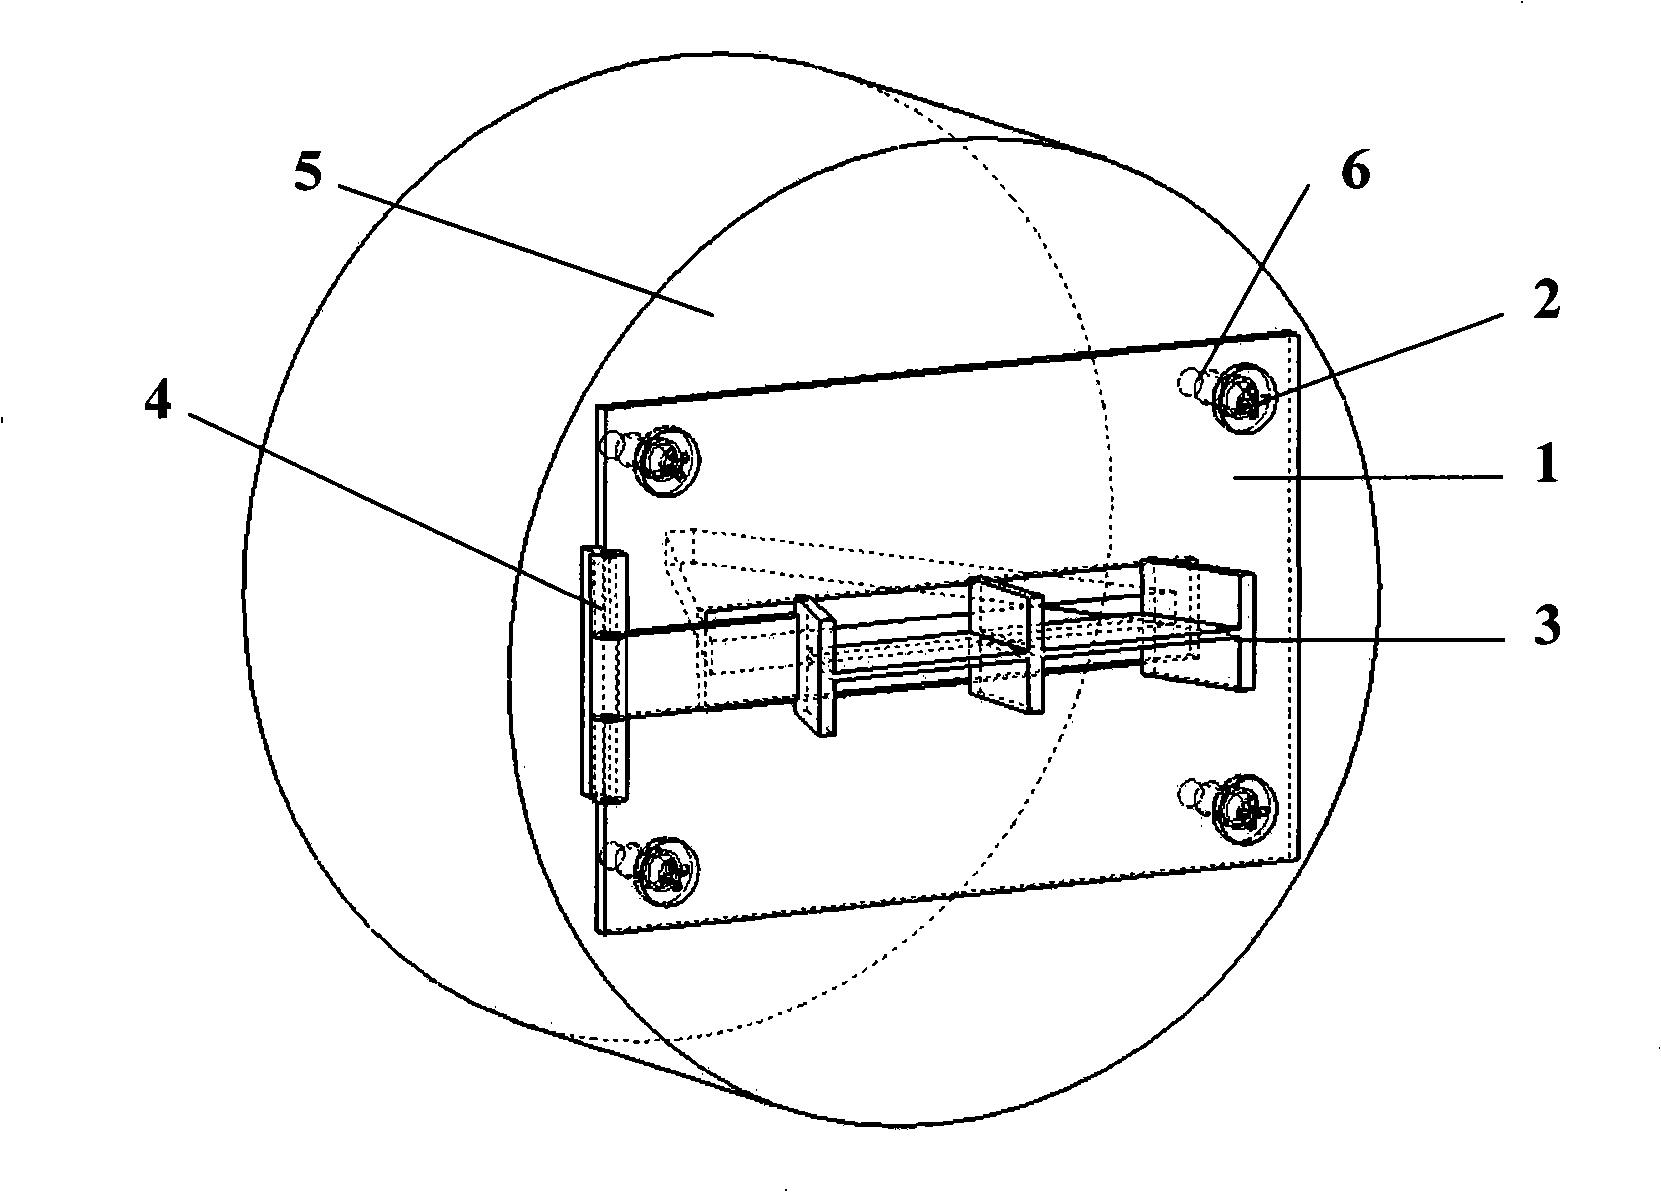 Method and apparatus for centering radiation source and detector on nondestructive testing of large-scale component